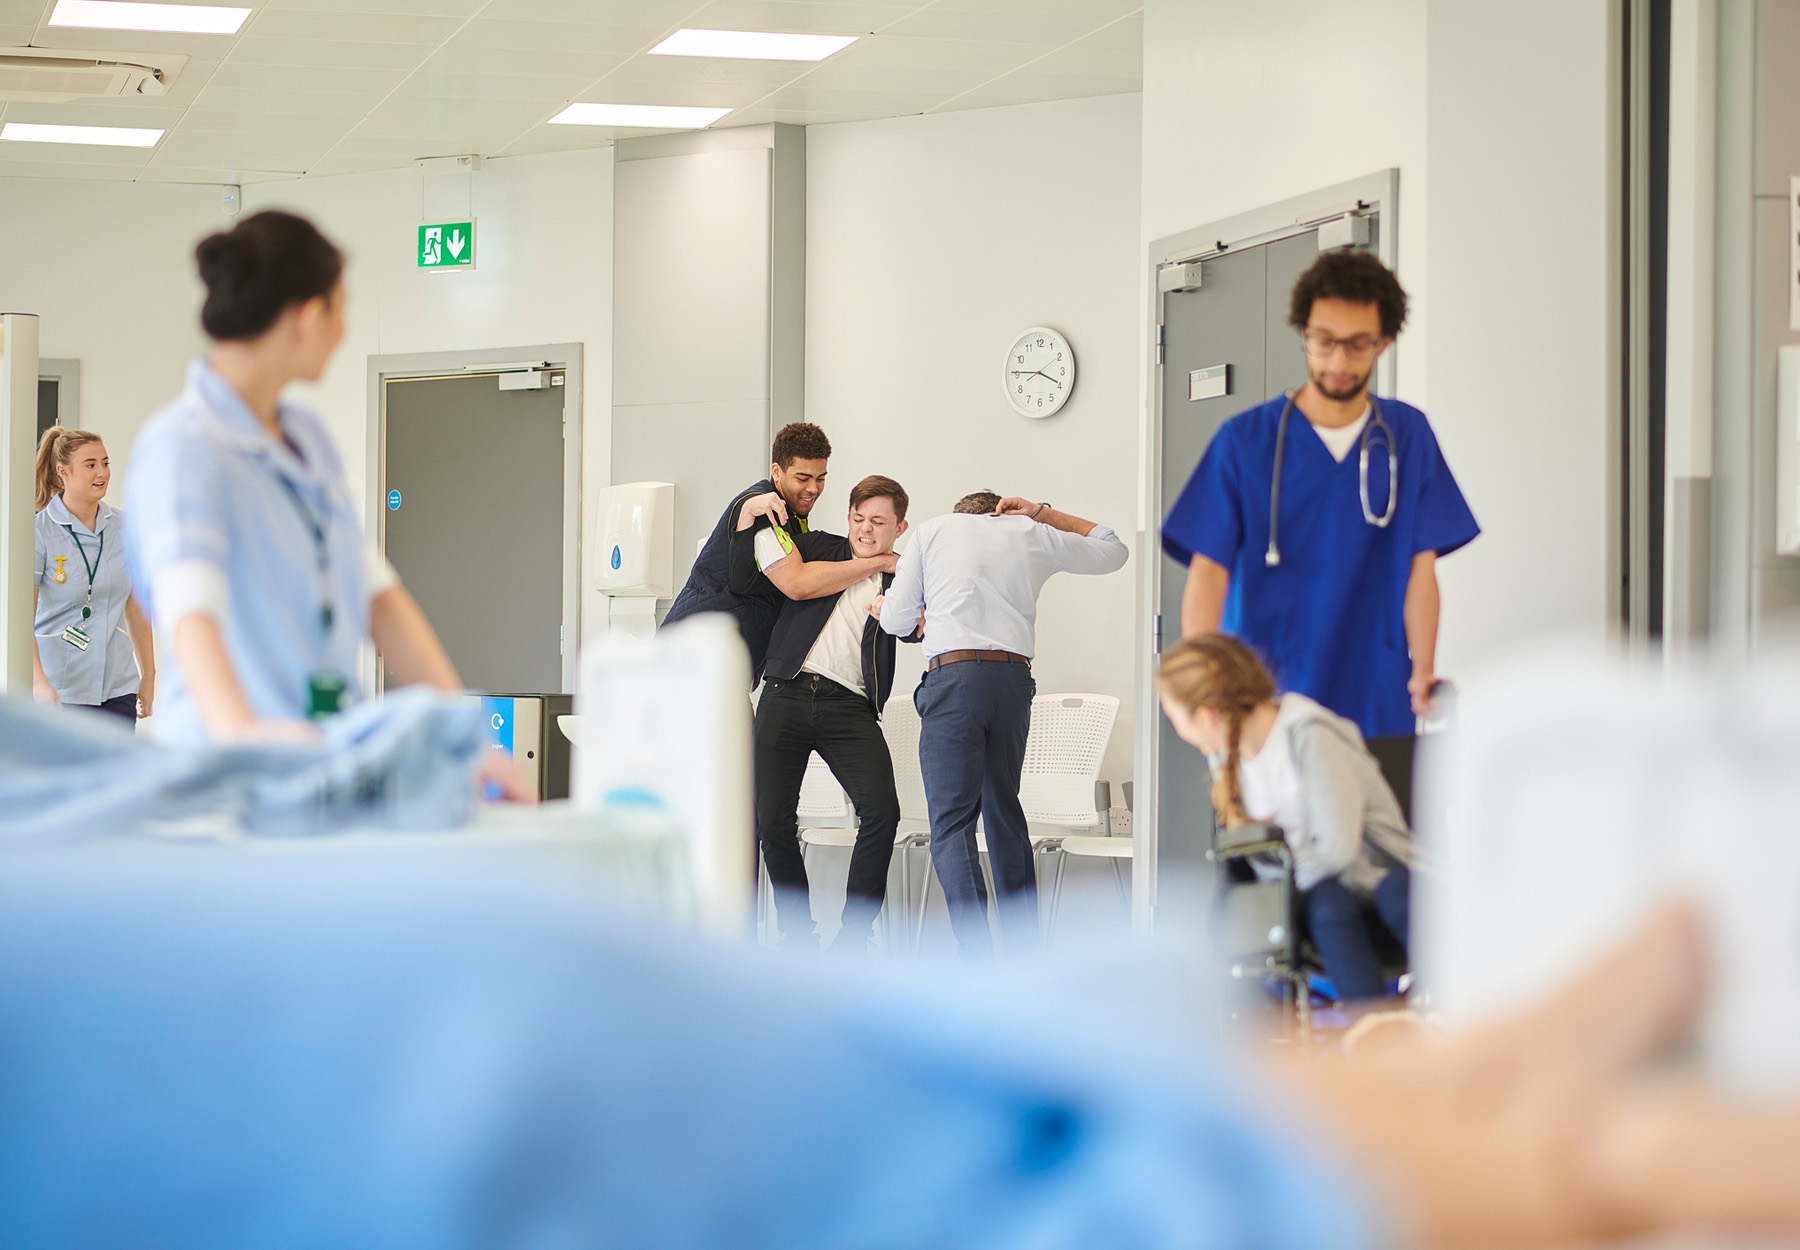 Two men restrain another man who is trying to get to health care workers in a hospital stock photo